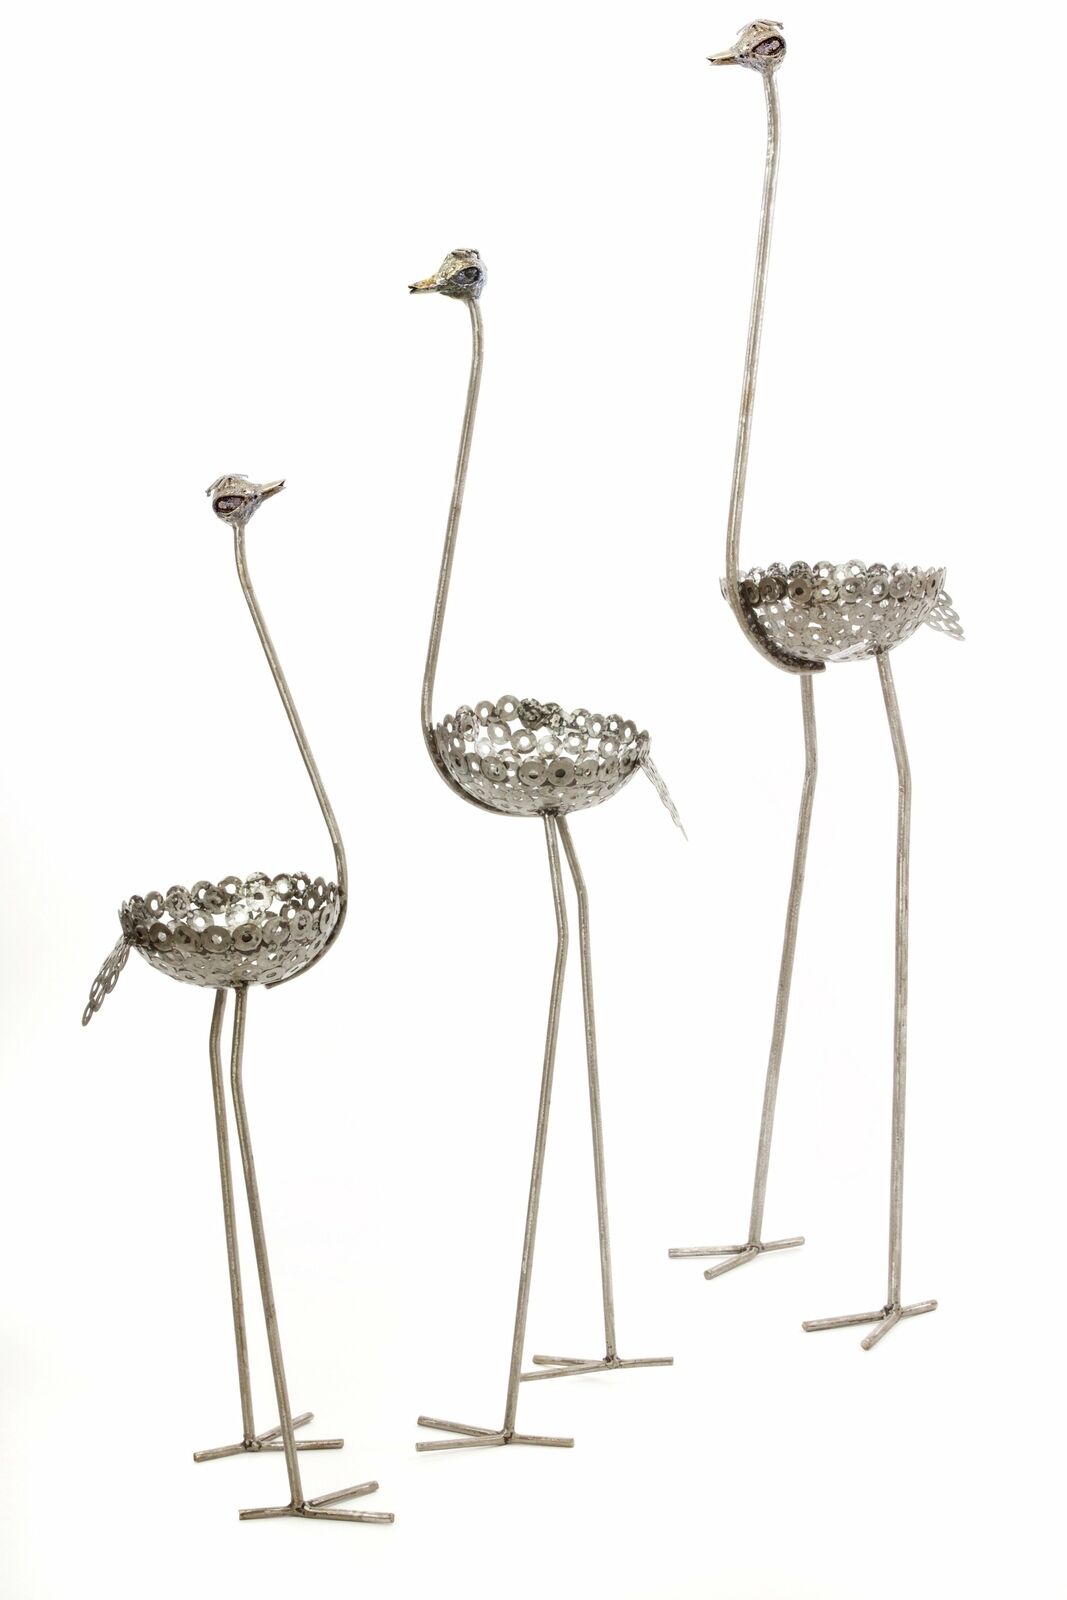 Tall Recycled Metal Ostrich Planters Fair Trade Made In Kenya, Africa